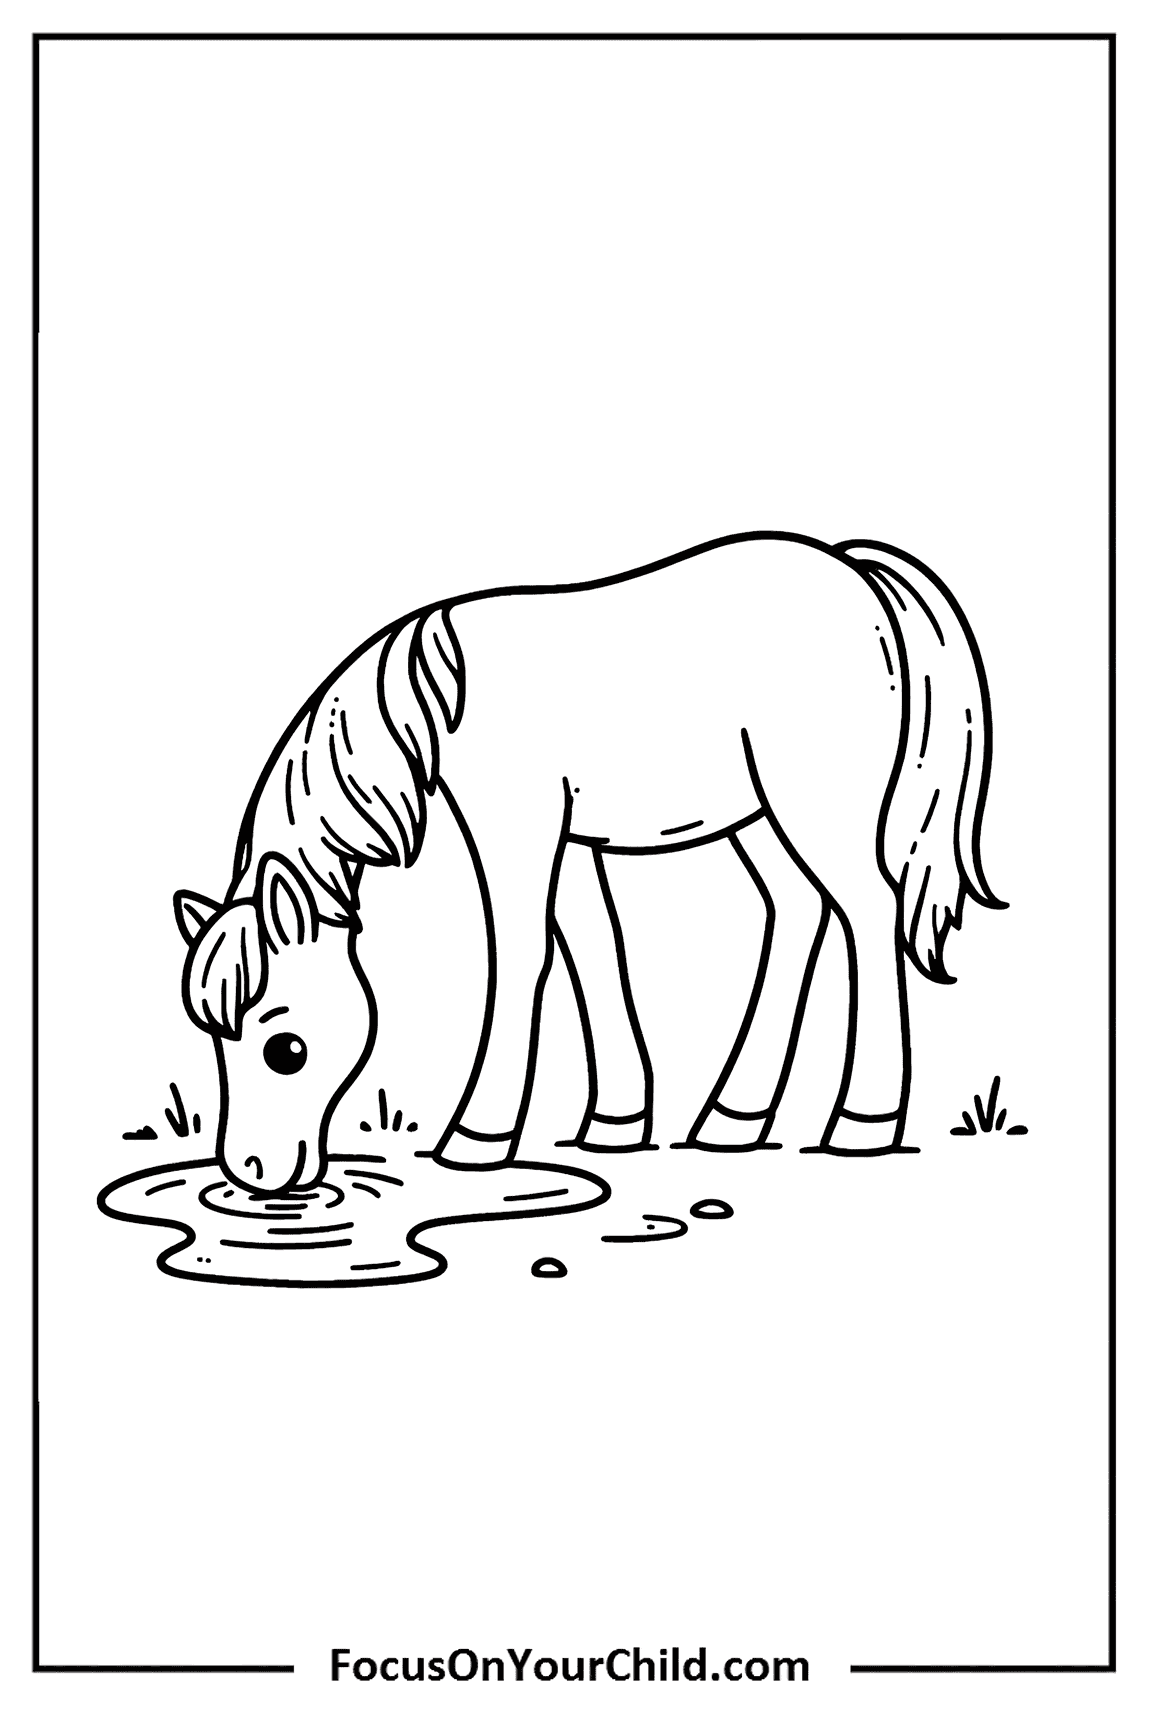 Black-and-white drawing of horse drinking from pool in natural setting, FocusOnYourChild.com.